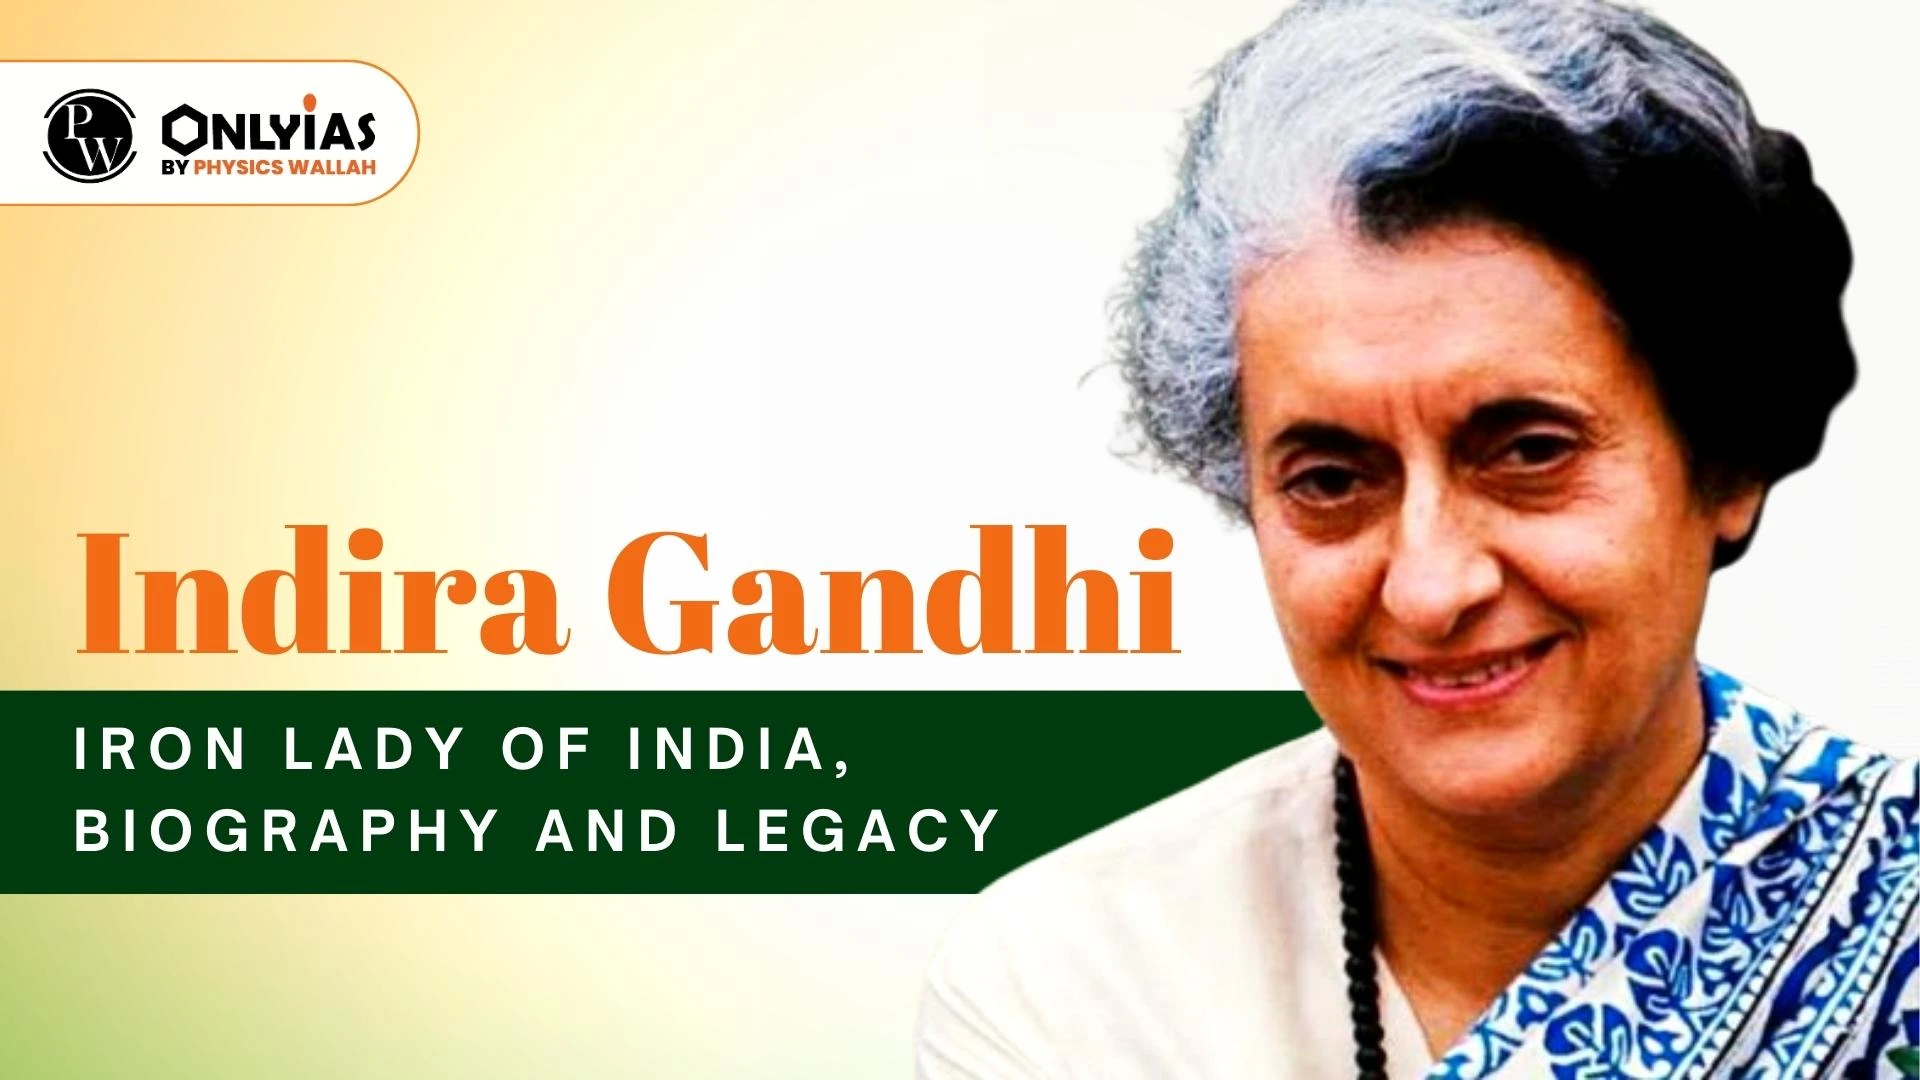 What were the achievements of Indira Gandhi as a Prime Minister? - Quora